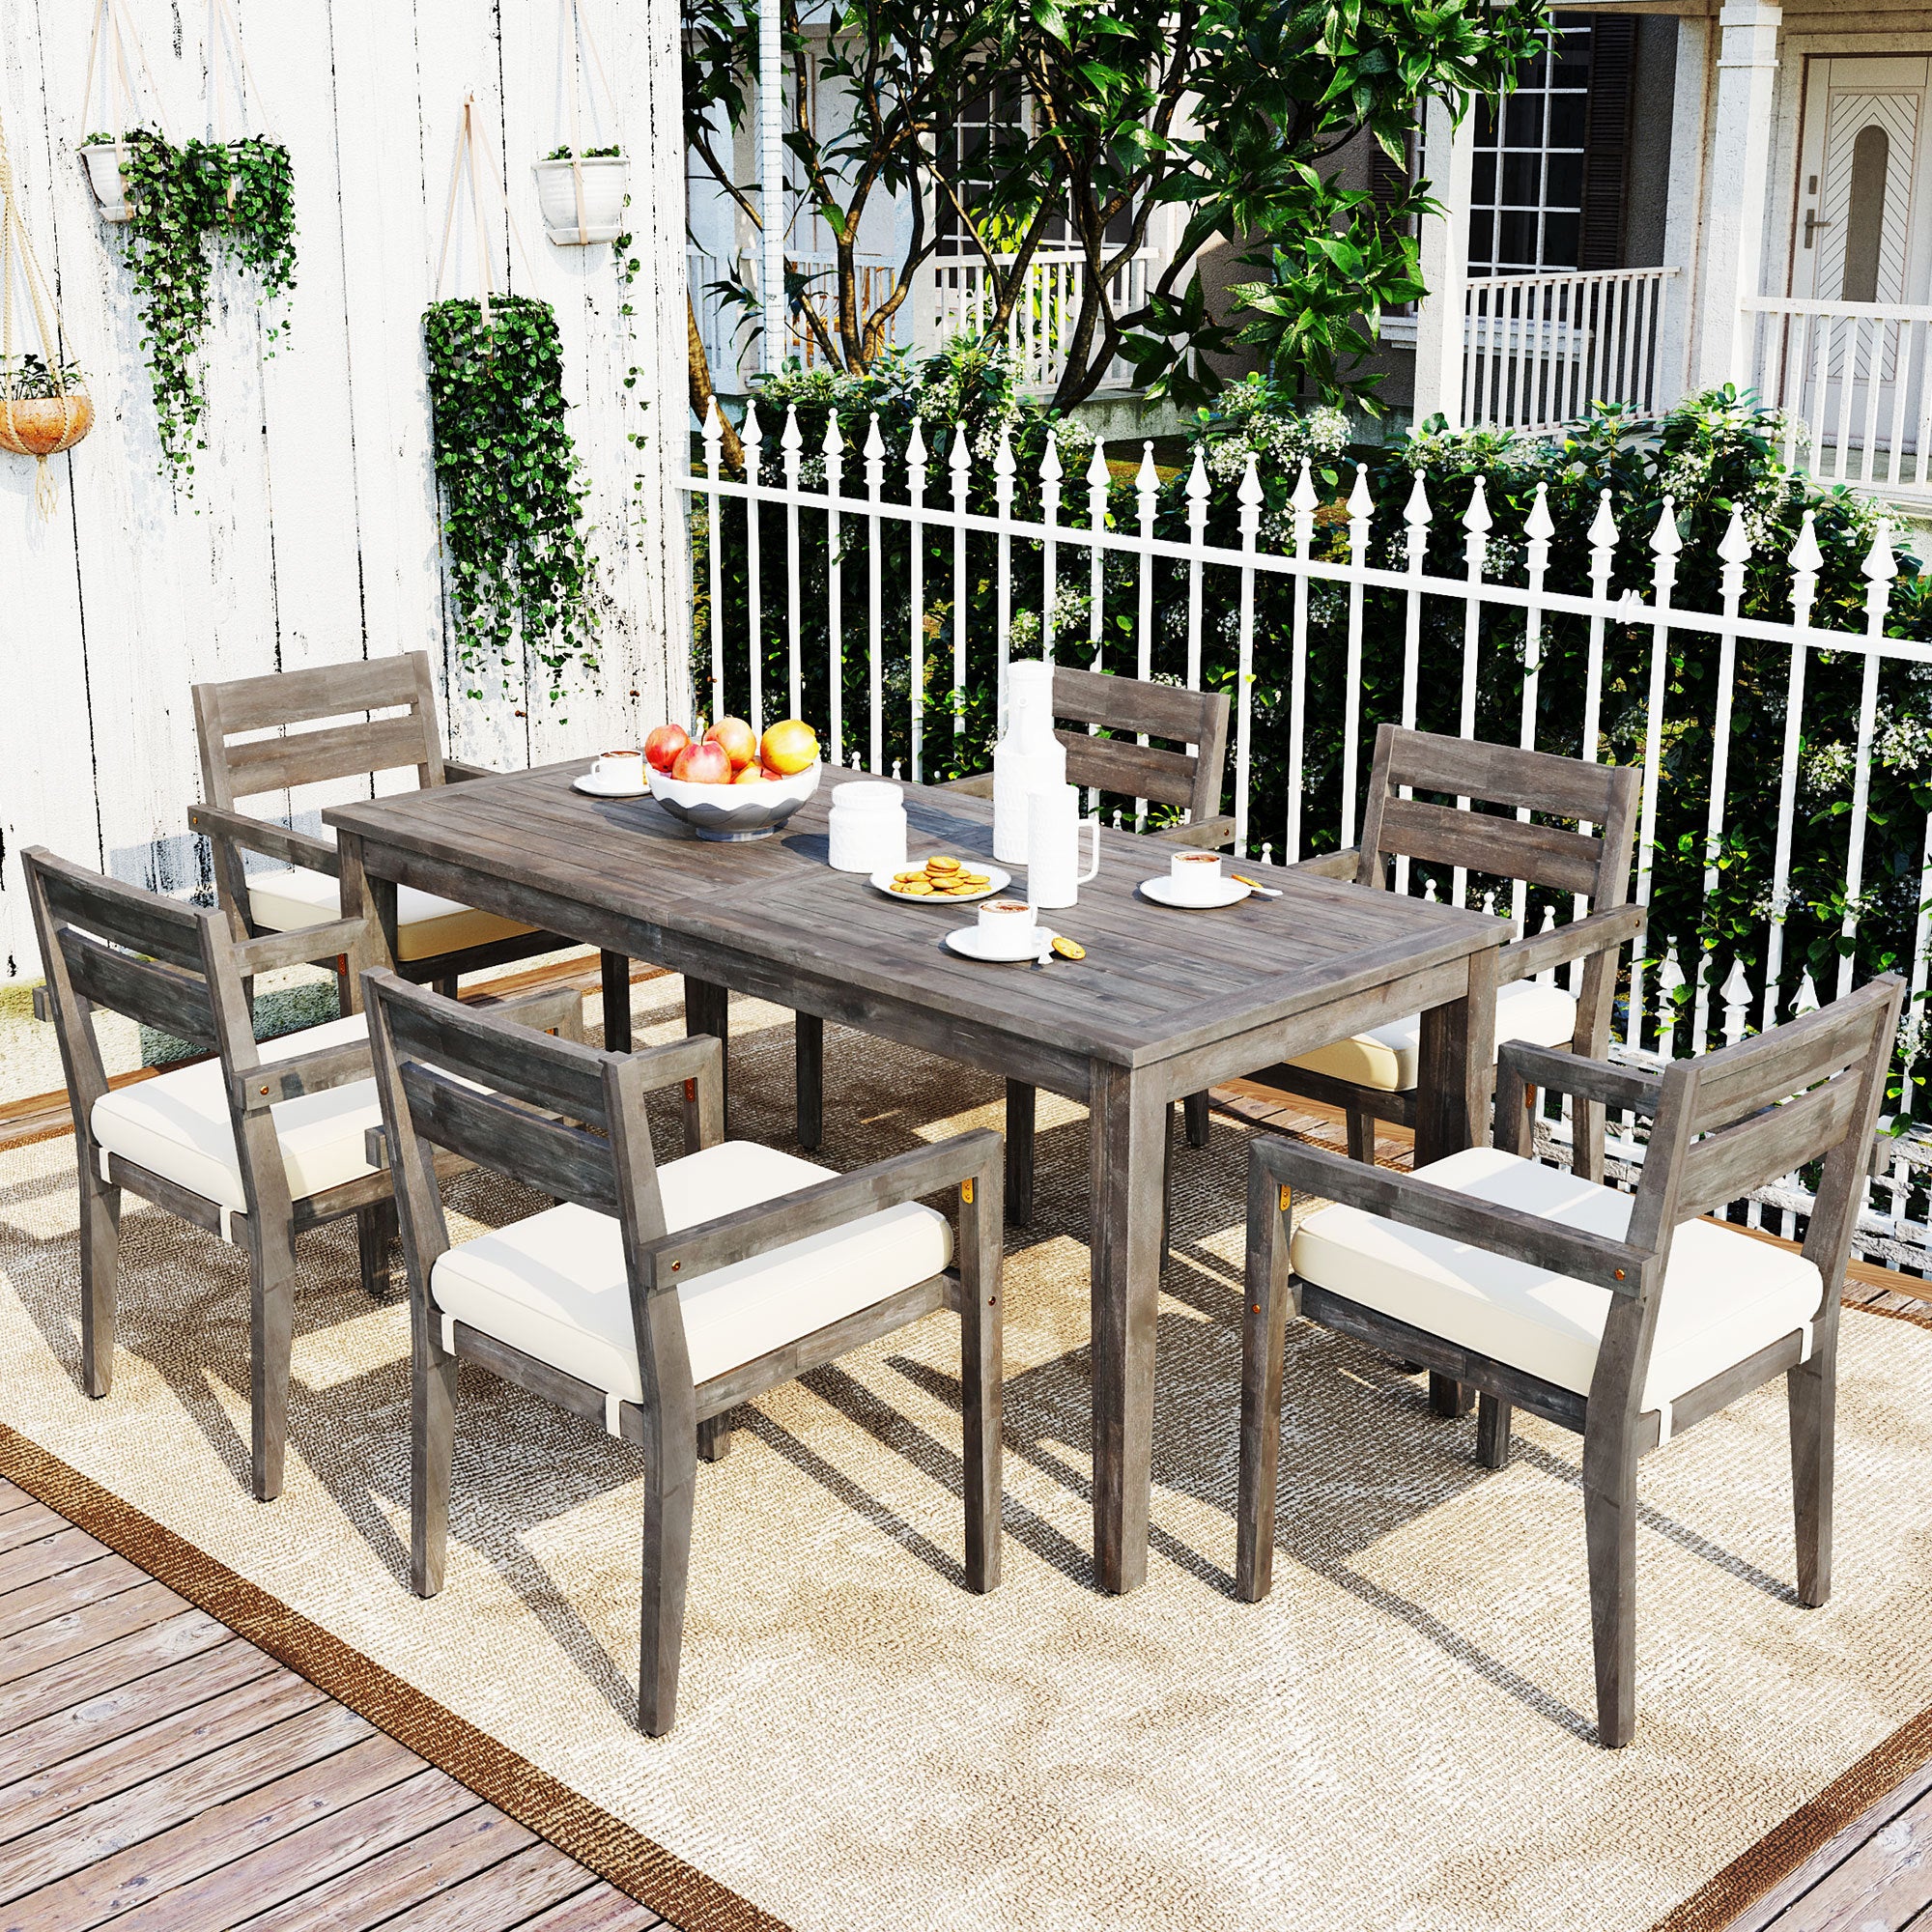 Acacia Wood Outdoor Dining Table And Chairs Suitable For Patio